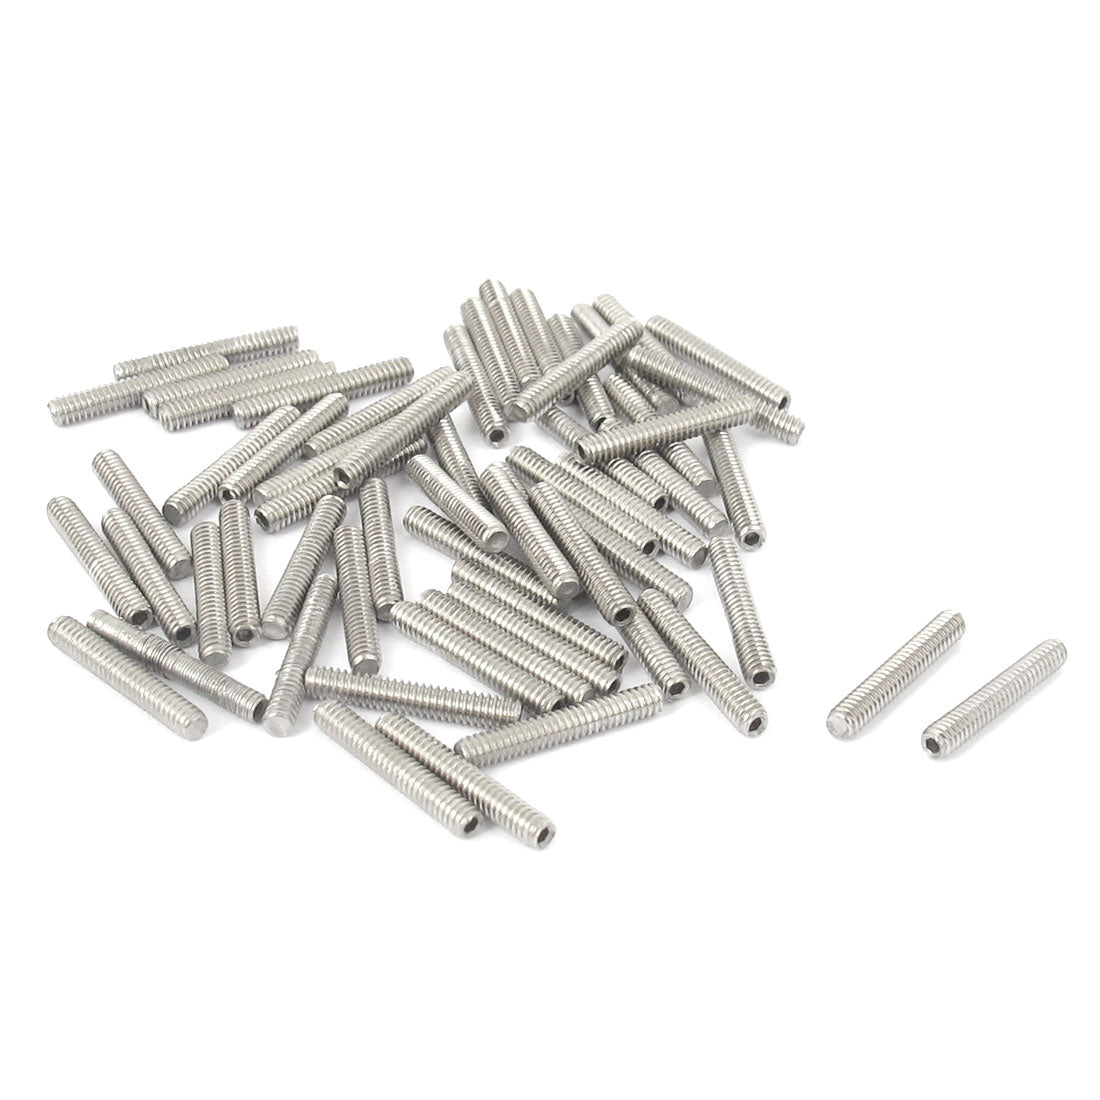 uxcell Uxcell M2x12mm Stainless Steel Hex Socket Set Cup Point Grub Screws Silver Tone 50pcs